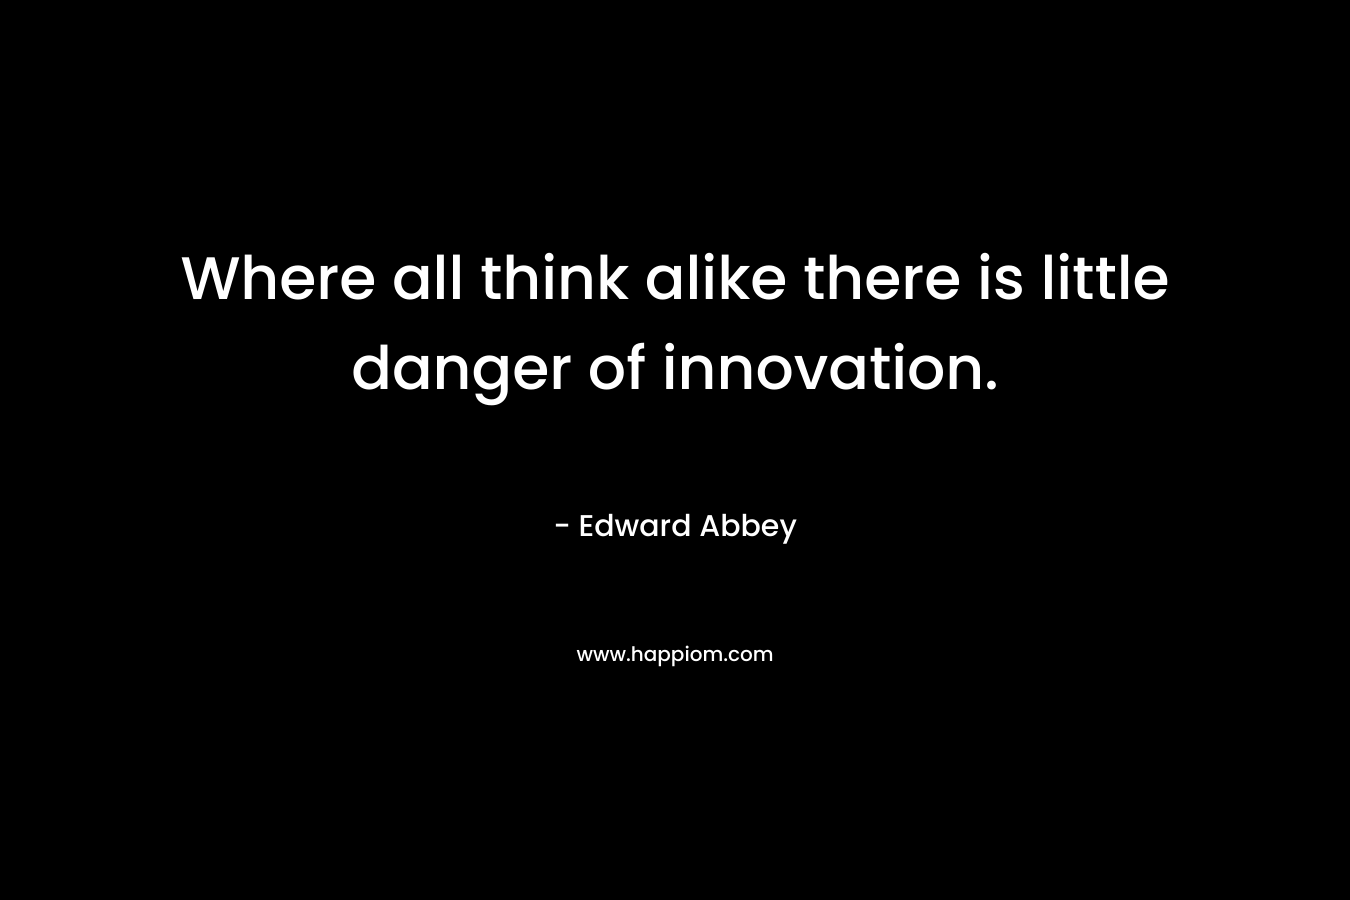 Where all think alike there is little danger of innovation.